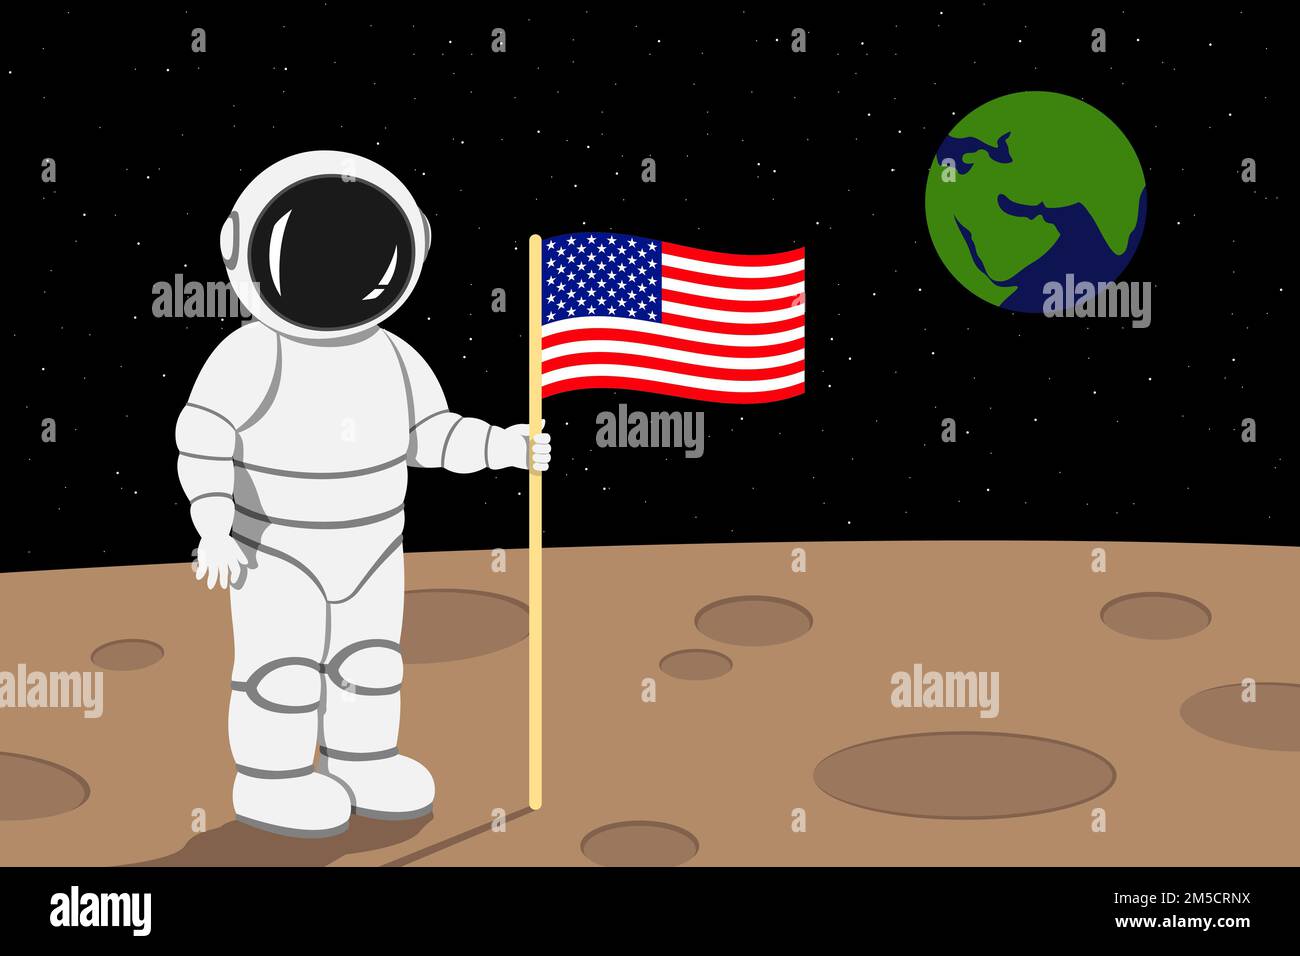 American astronaut stand on moon surface and hold flag of USA. Vector illustration. Stock Vector